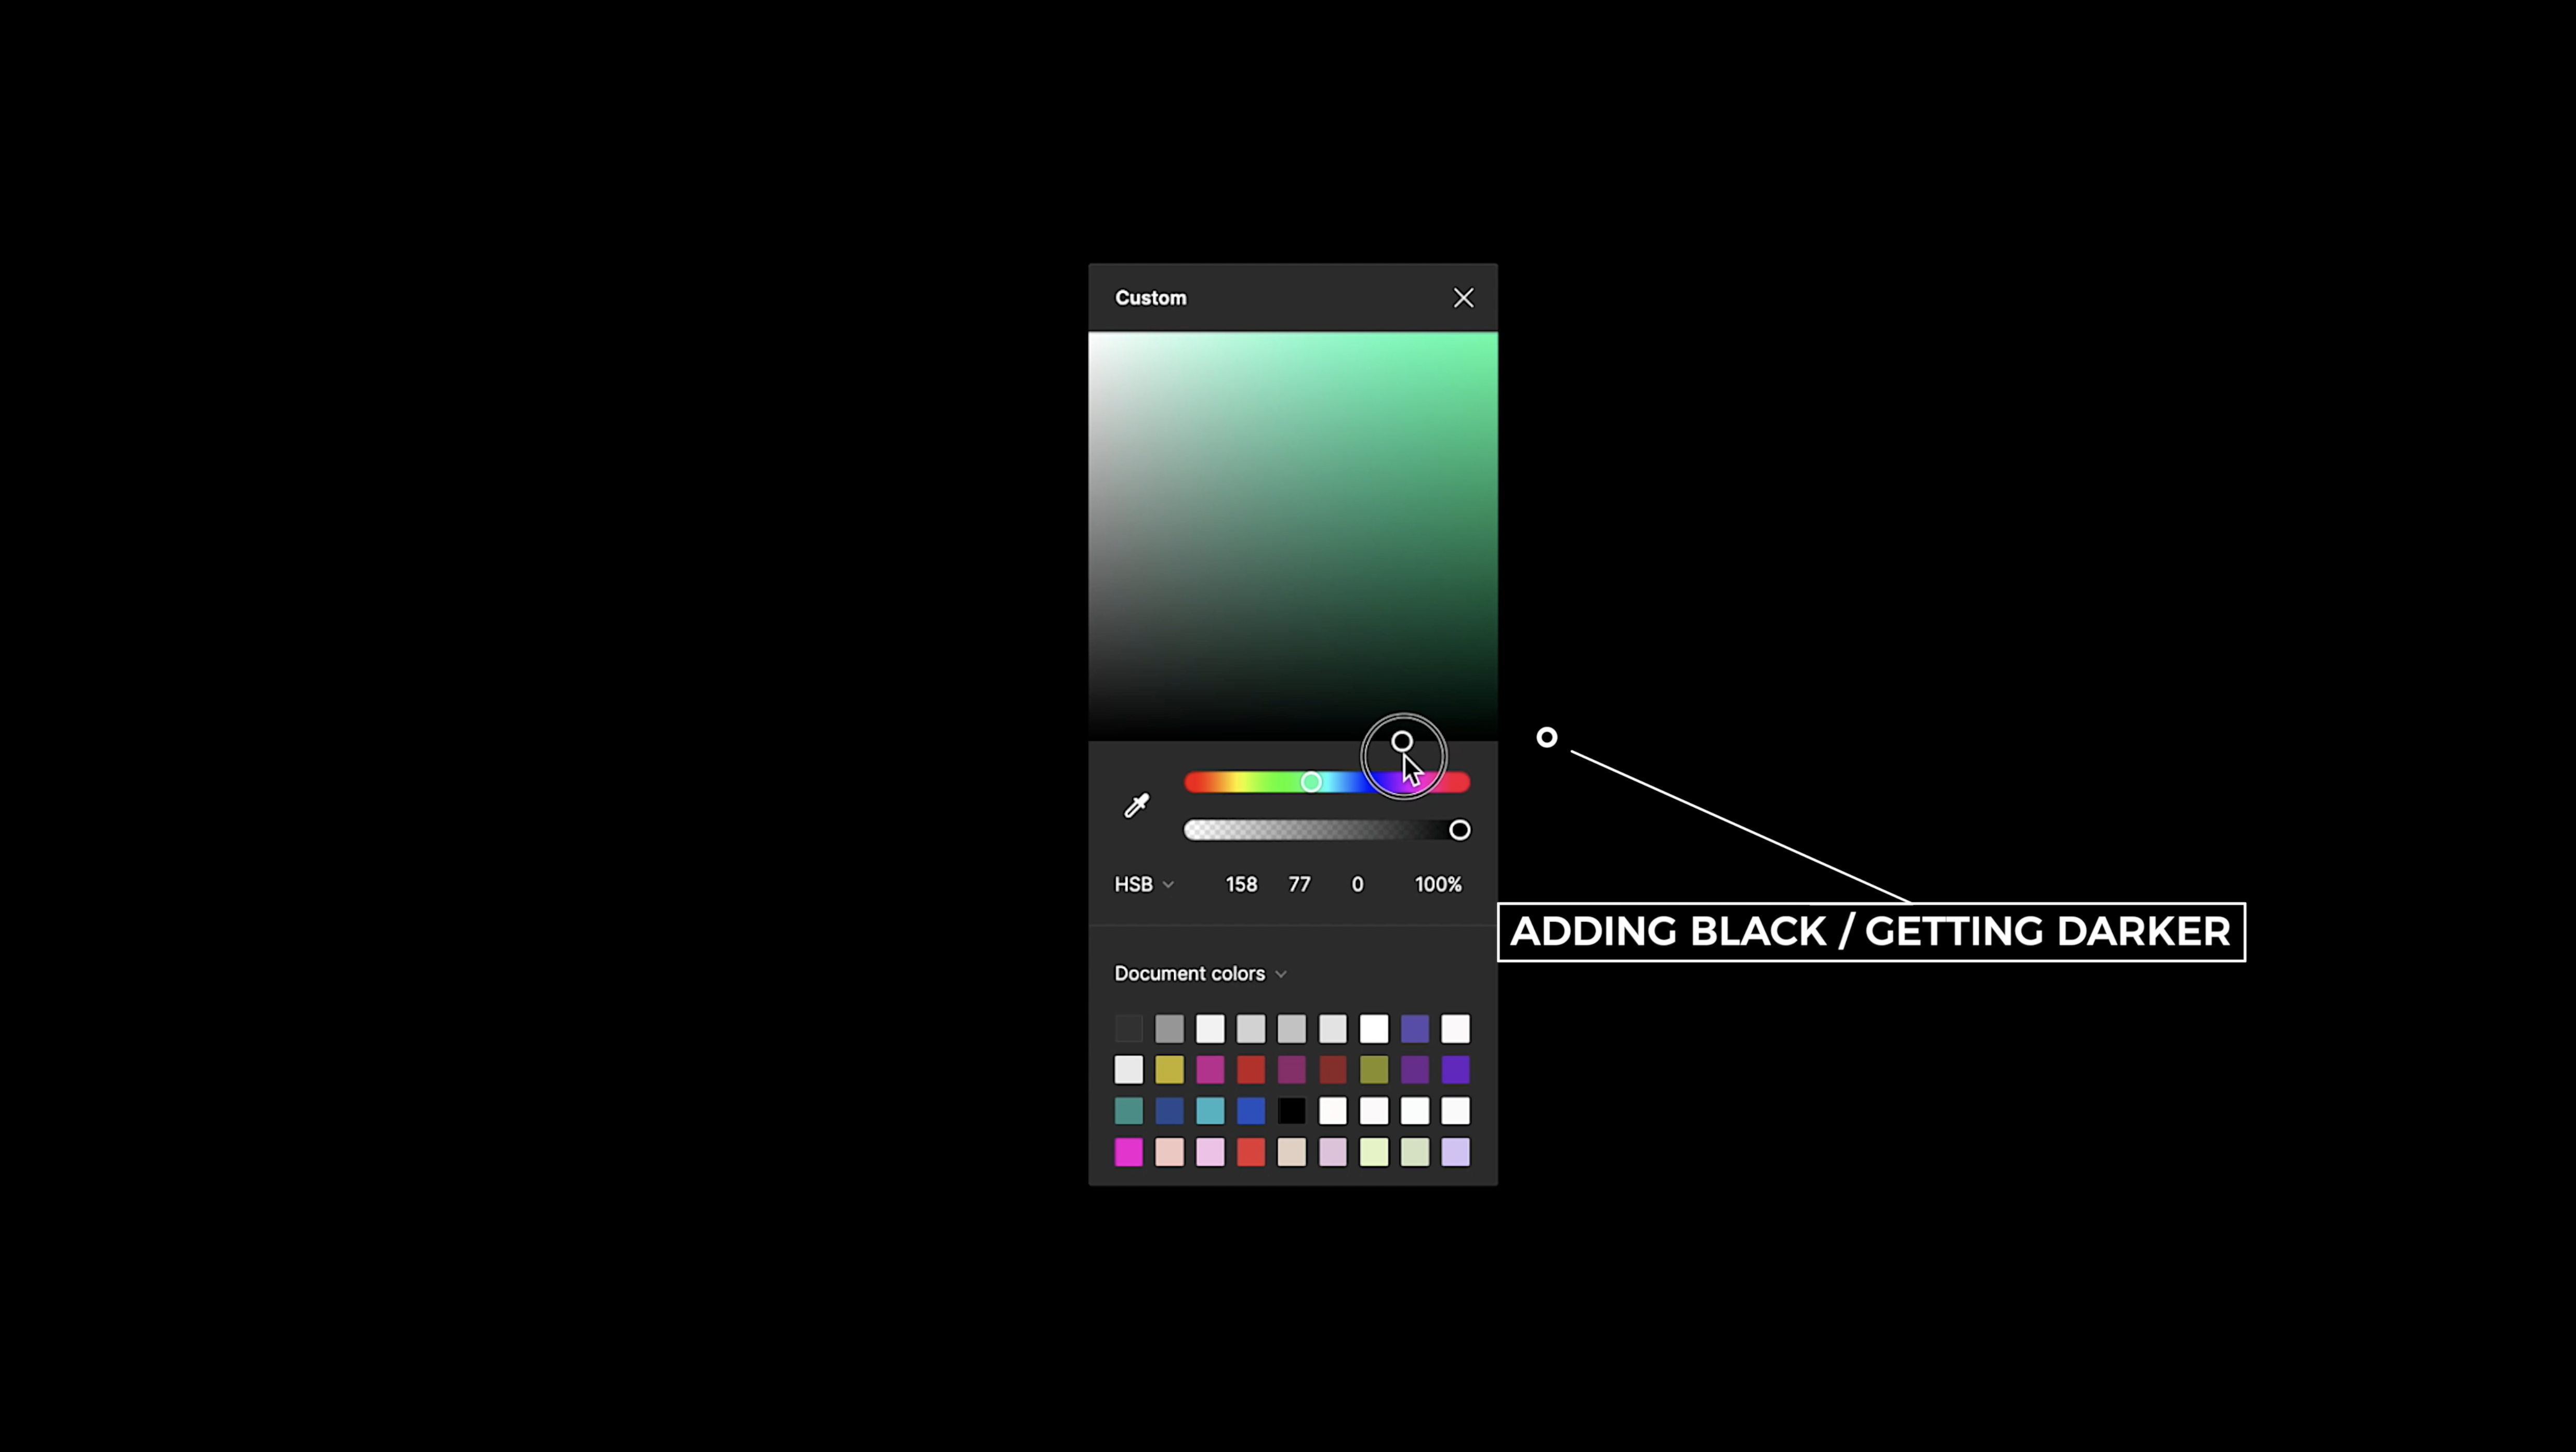 Adjust colors for control and events · Issue #1489